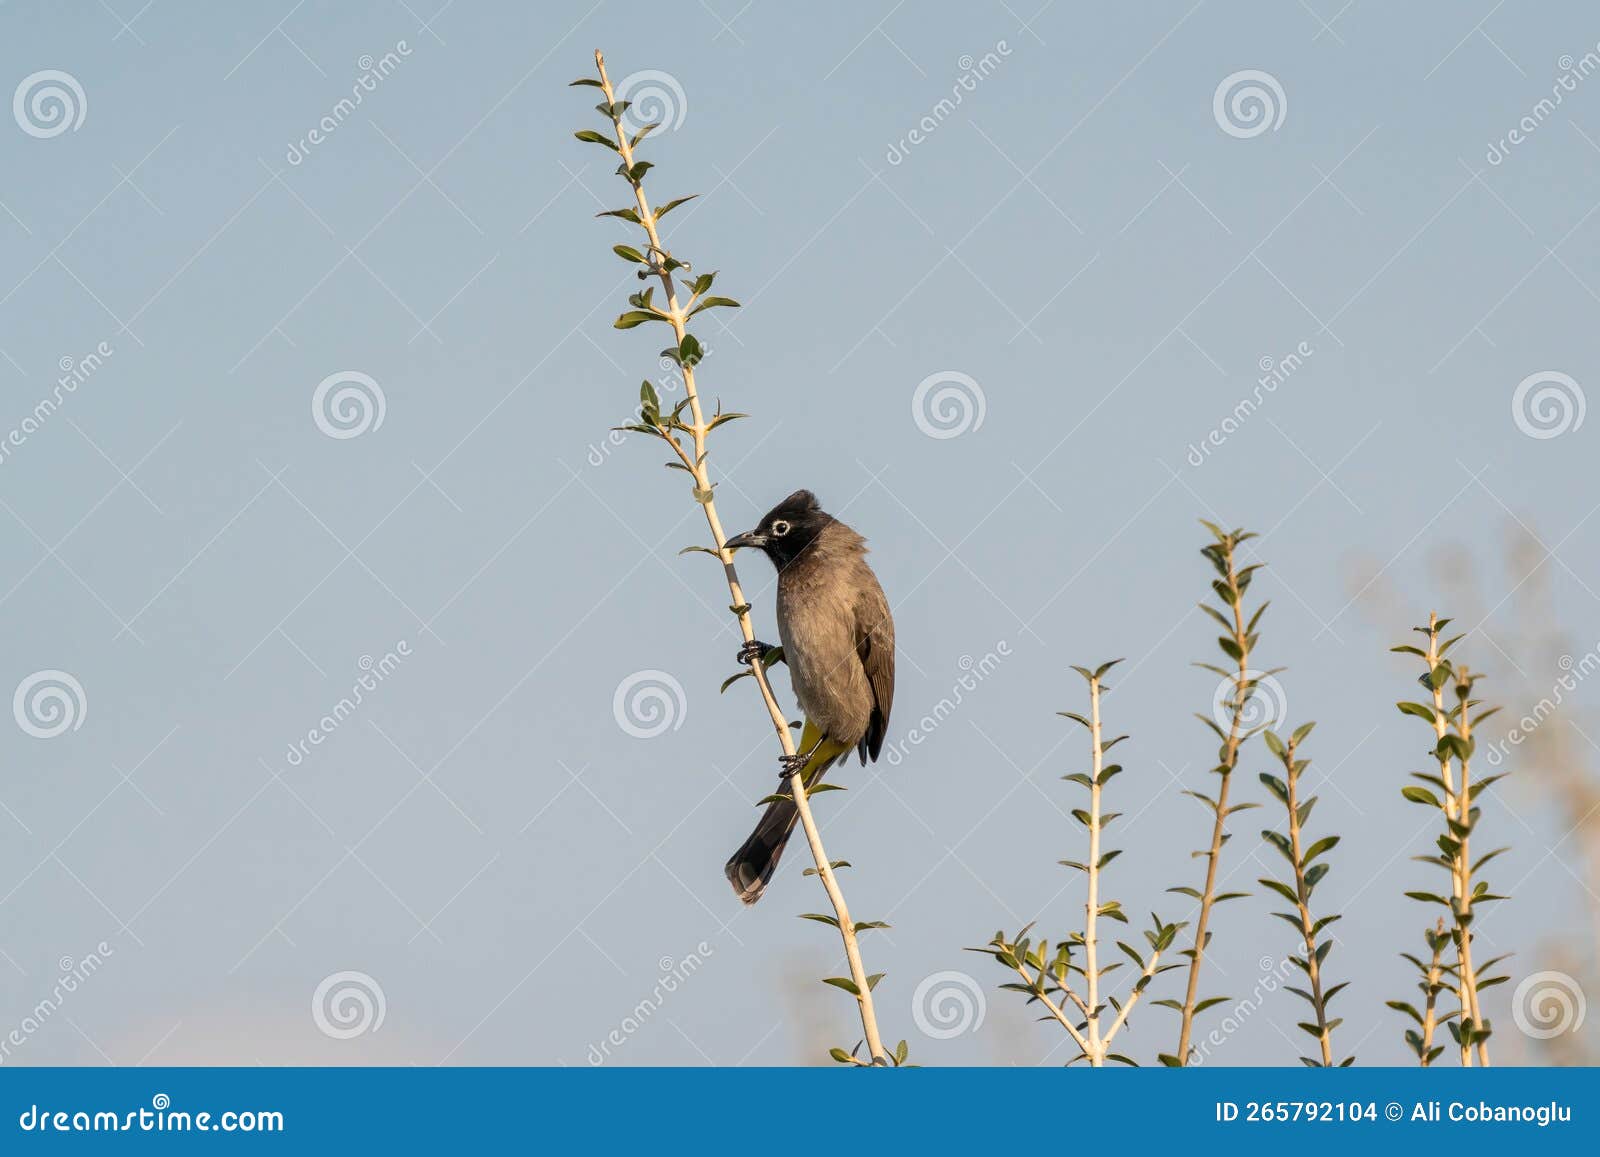 an arabian nightingale perched on a branch. pycnonotus xanthopygos